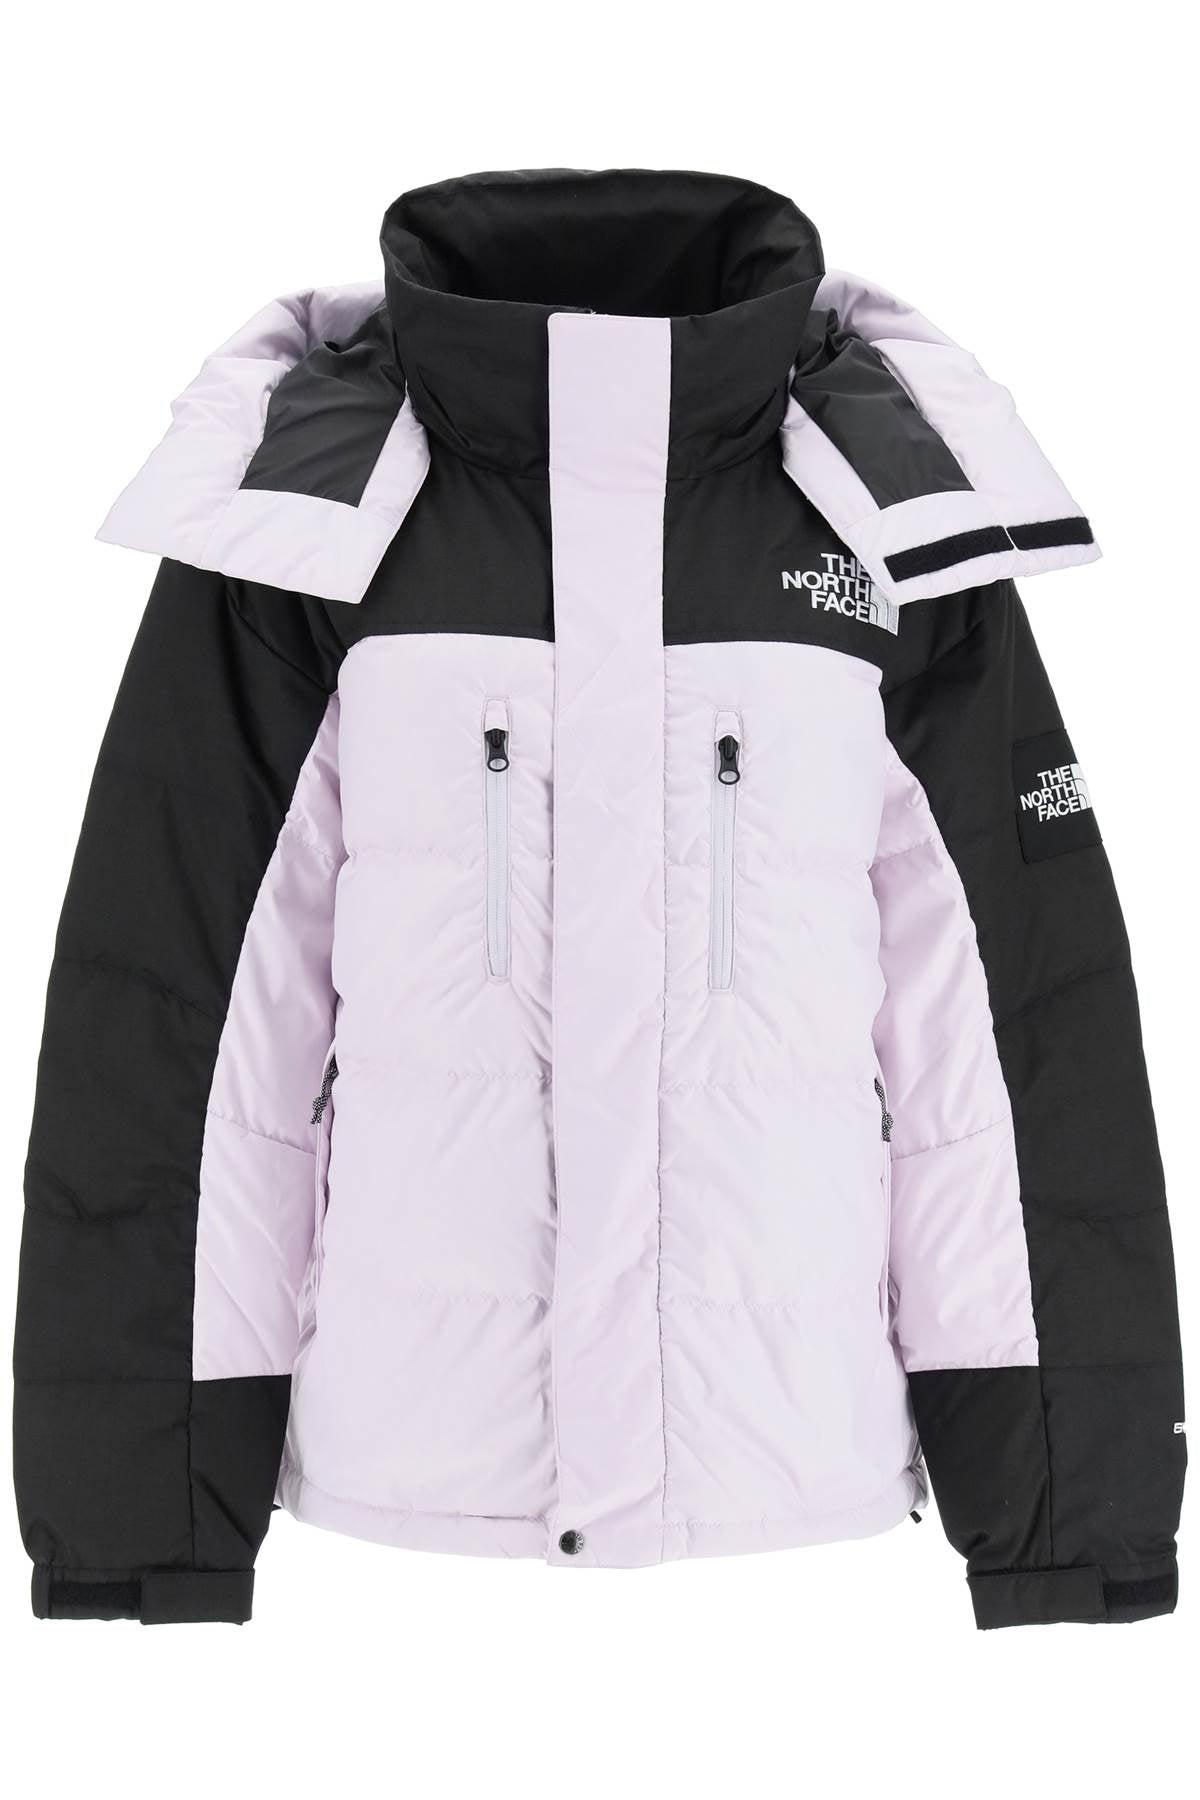 The North Face Himalayan 550 Down Jacket in Black | Lyst